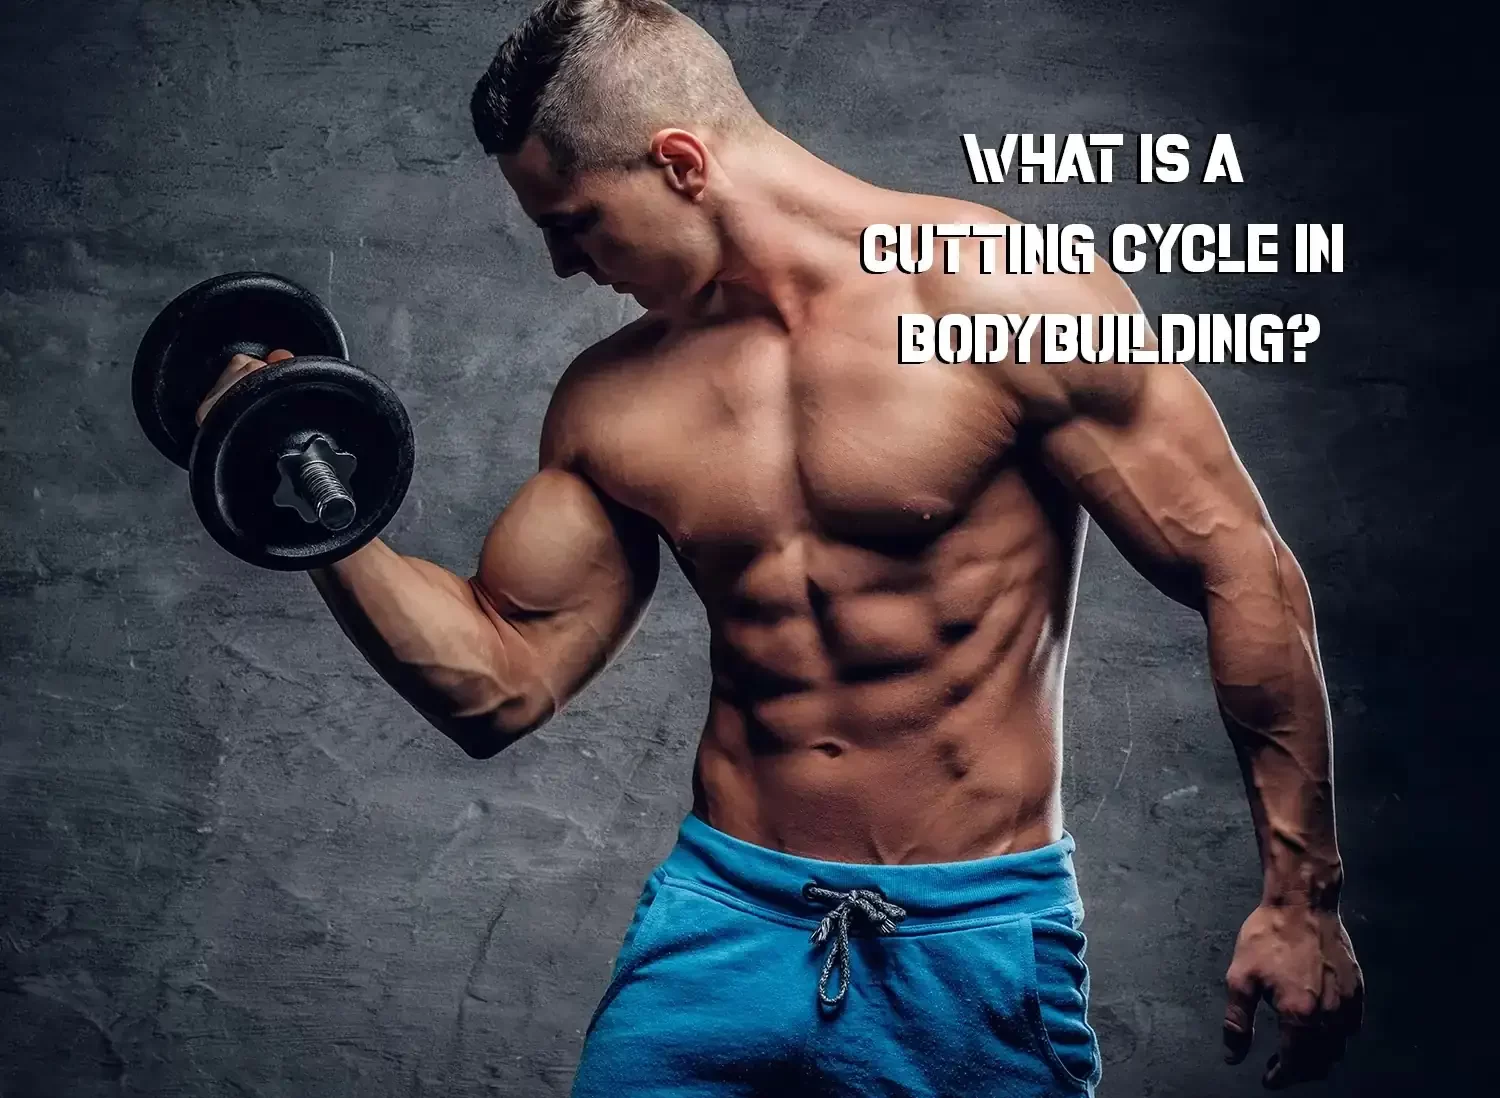 Cutting cycle in bodybuilding